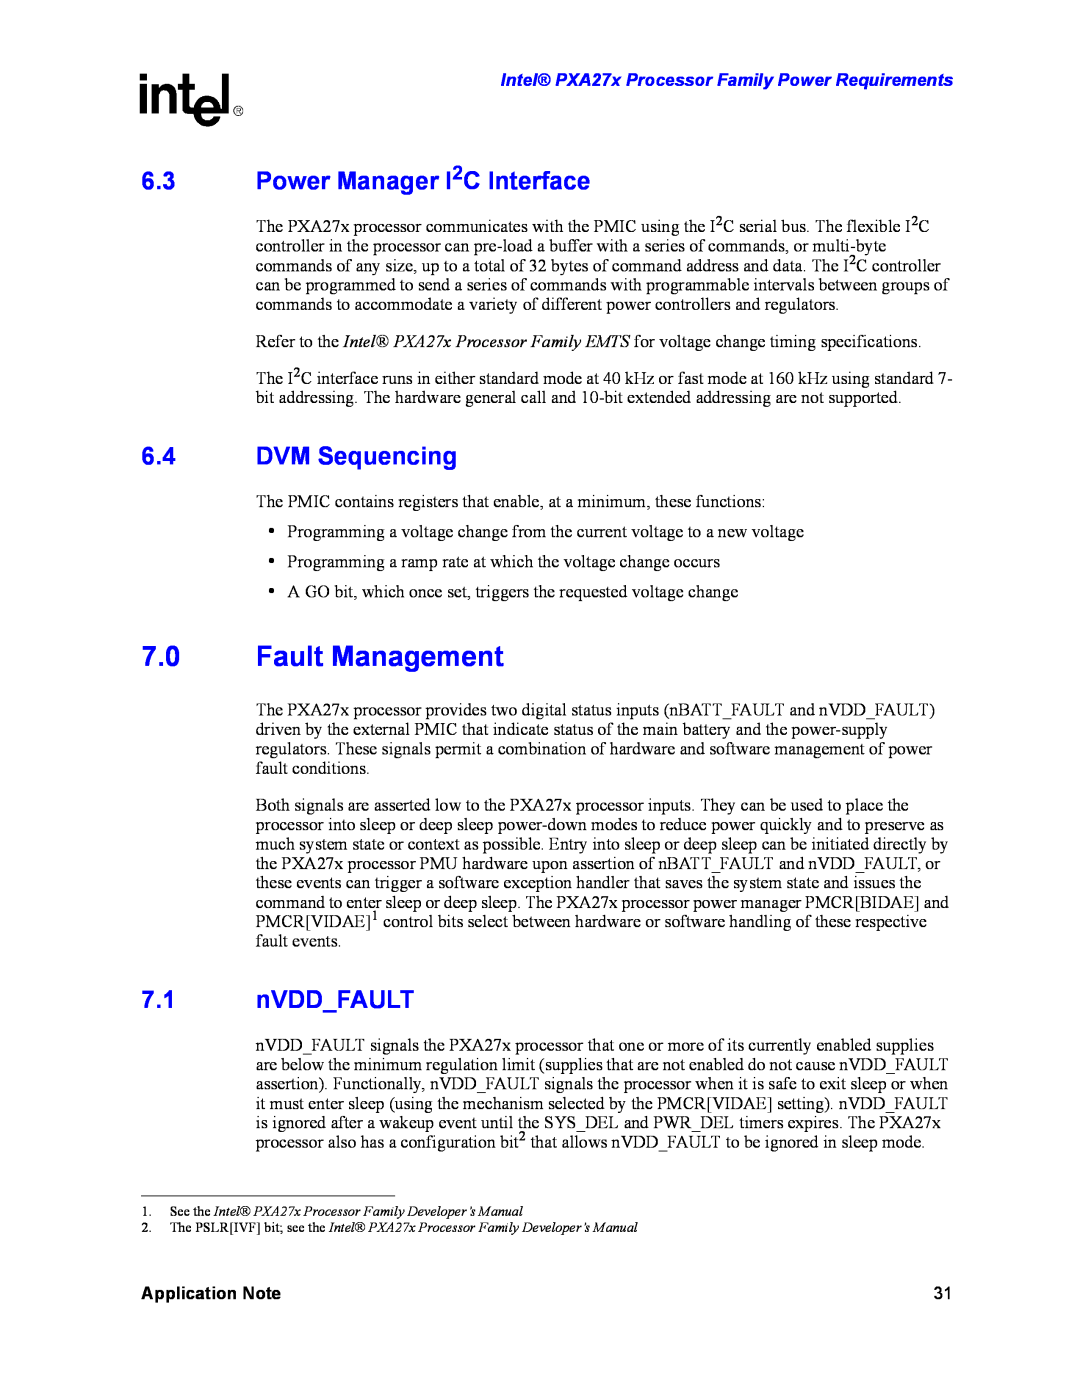 Intel PXA27X manual Fault Management, Power Manager I2C Interface, DVM Sequencing, nVDDFAULT, Application Note 